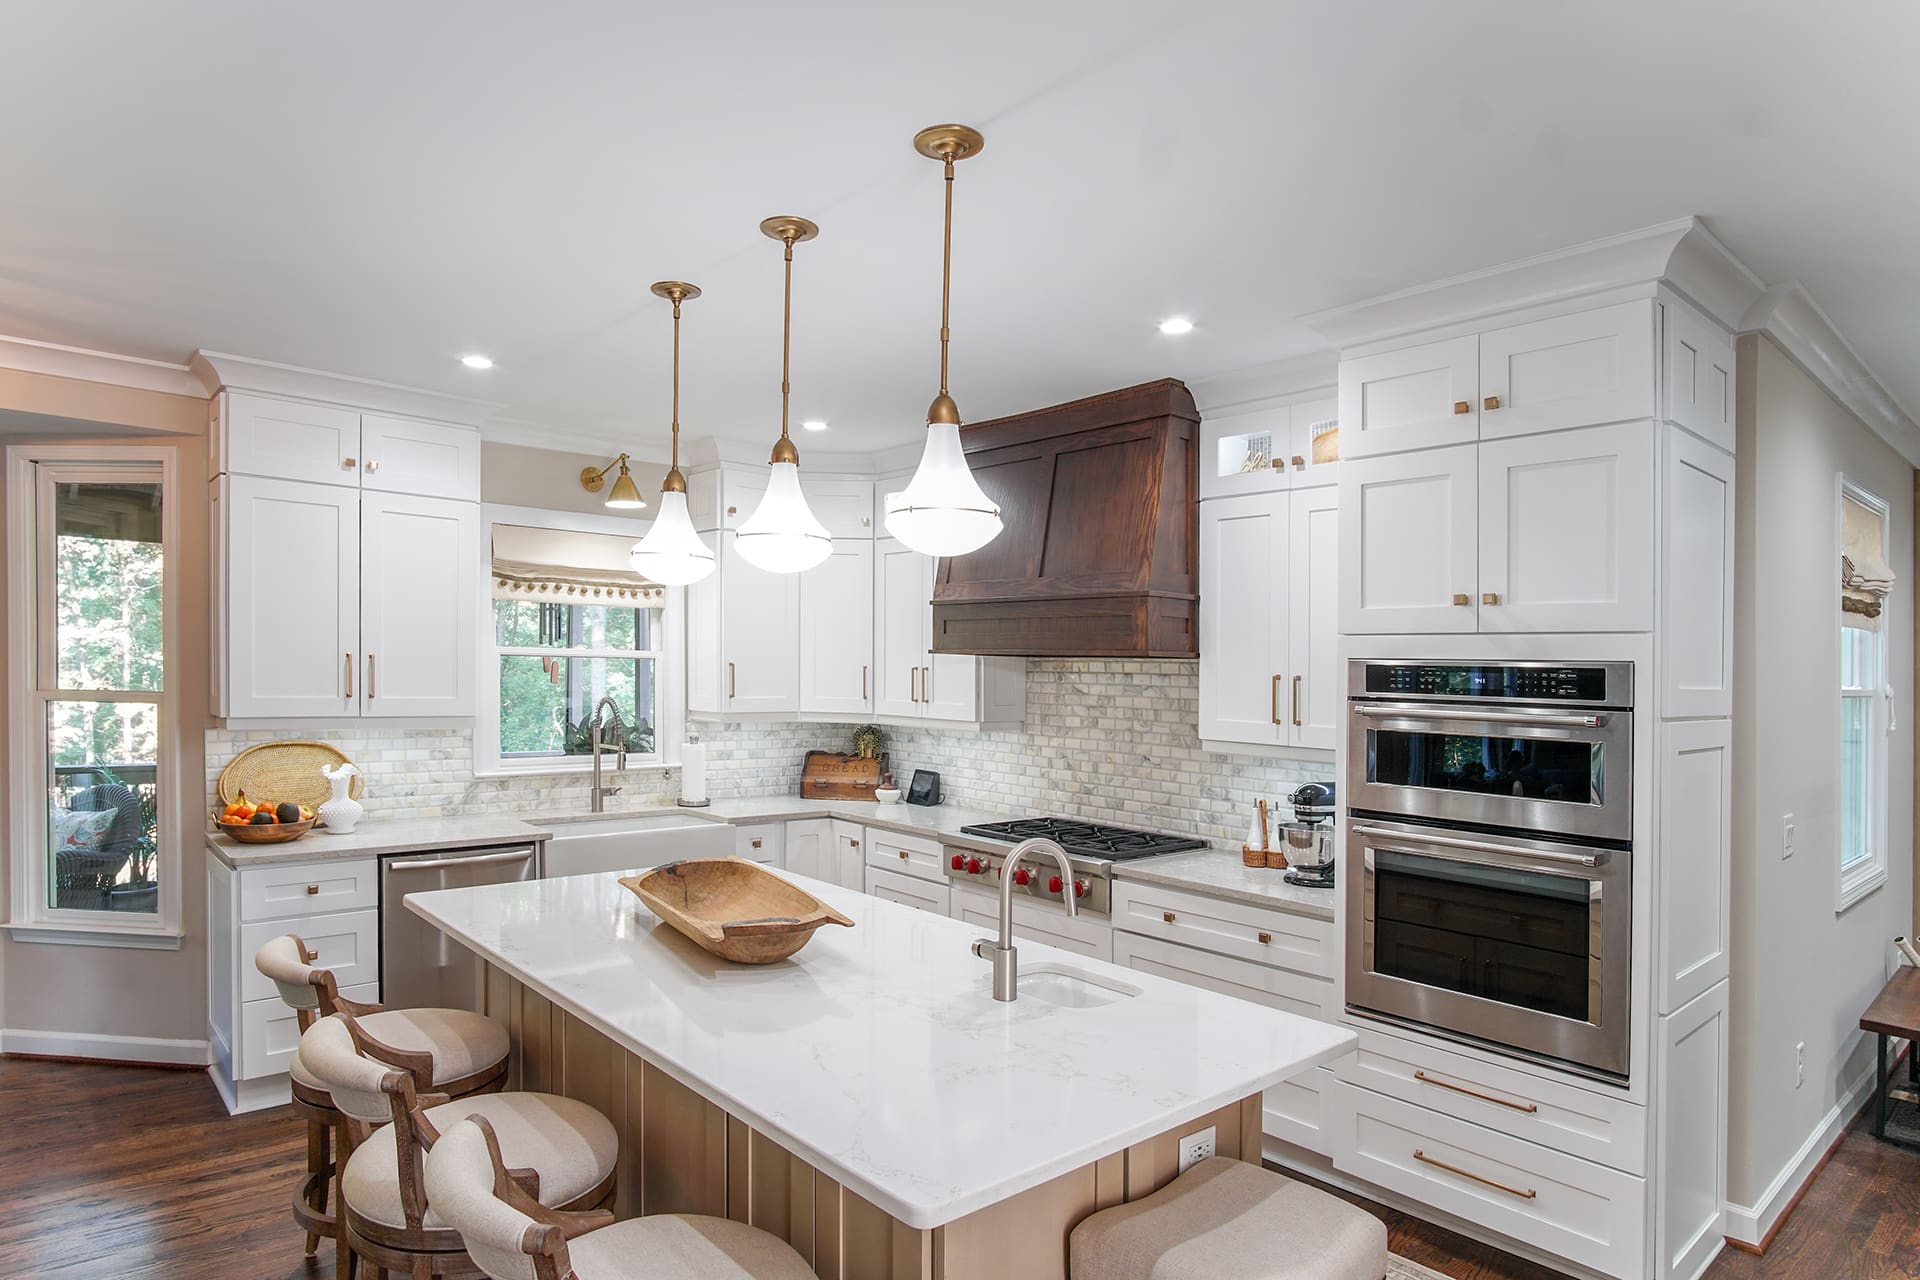 LifeArt White Transitional Kitchen cabinets with white countertops